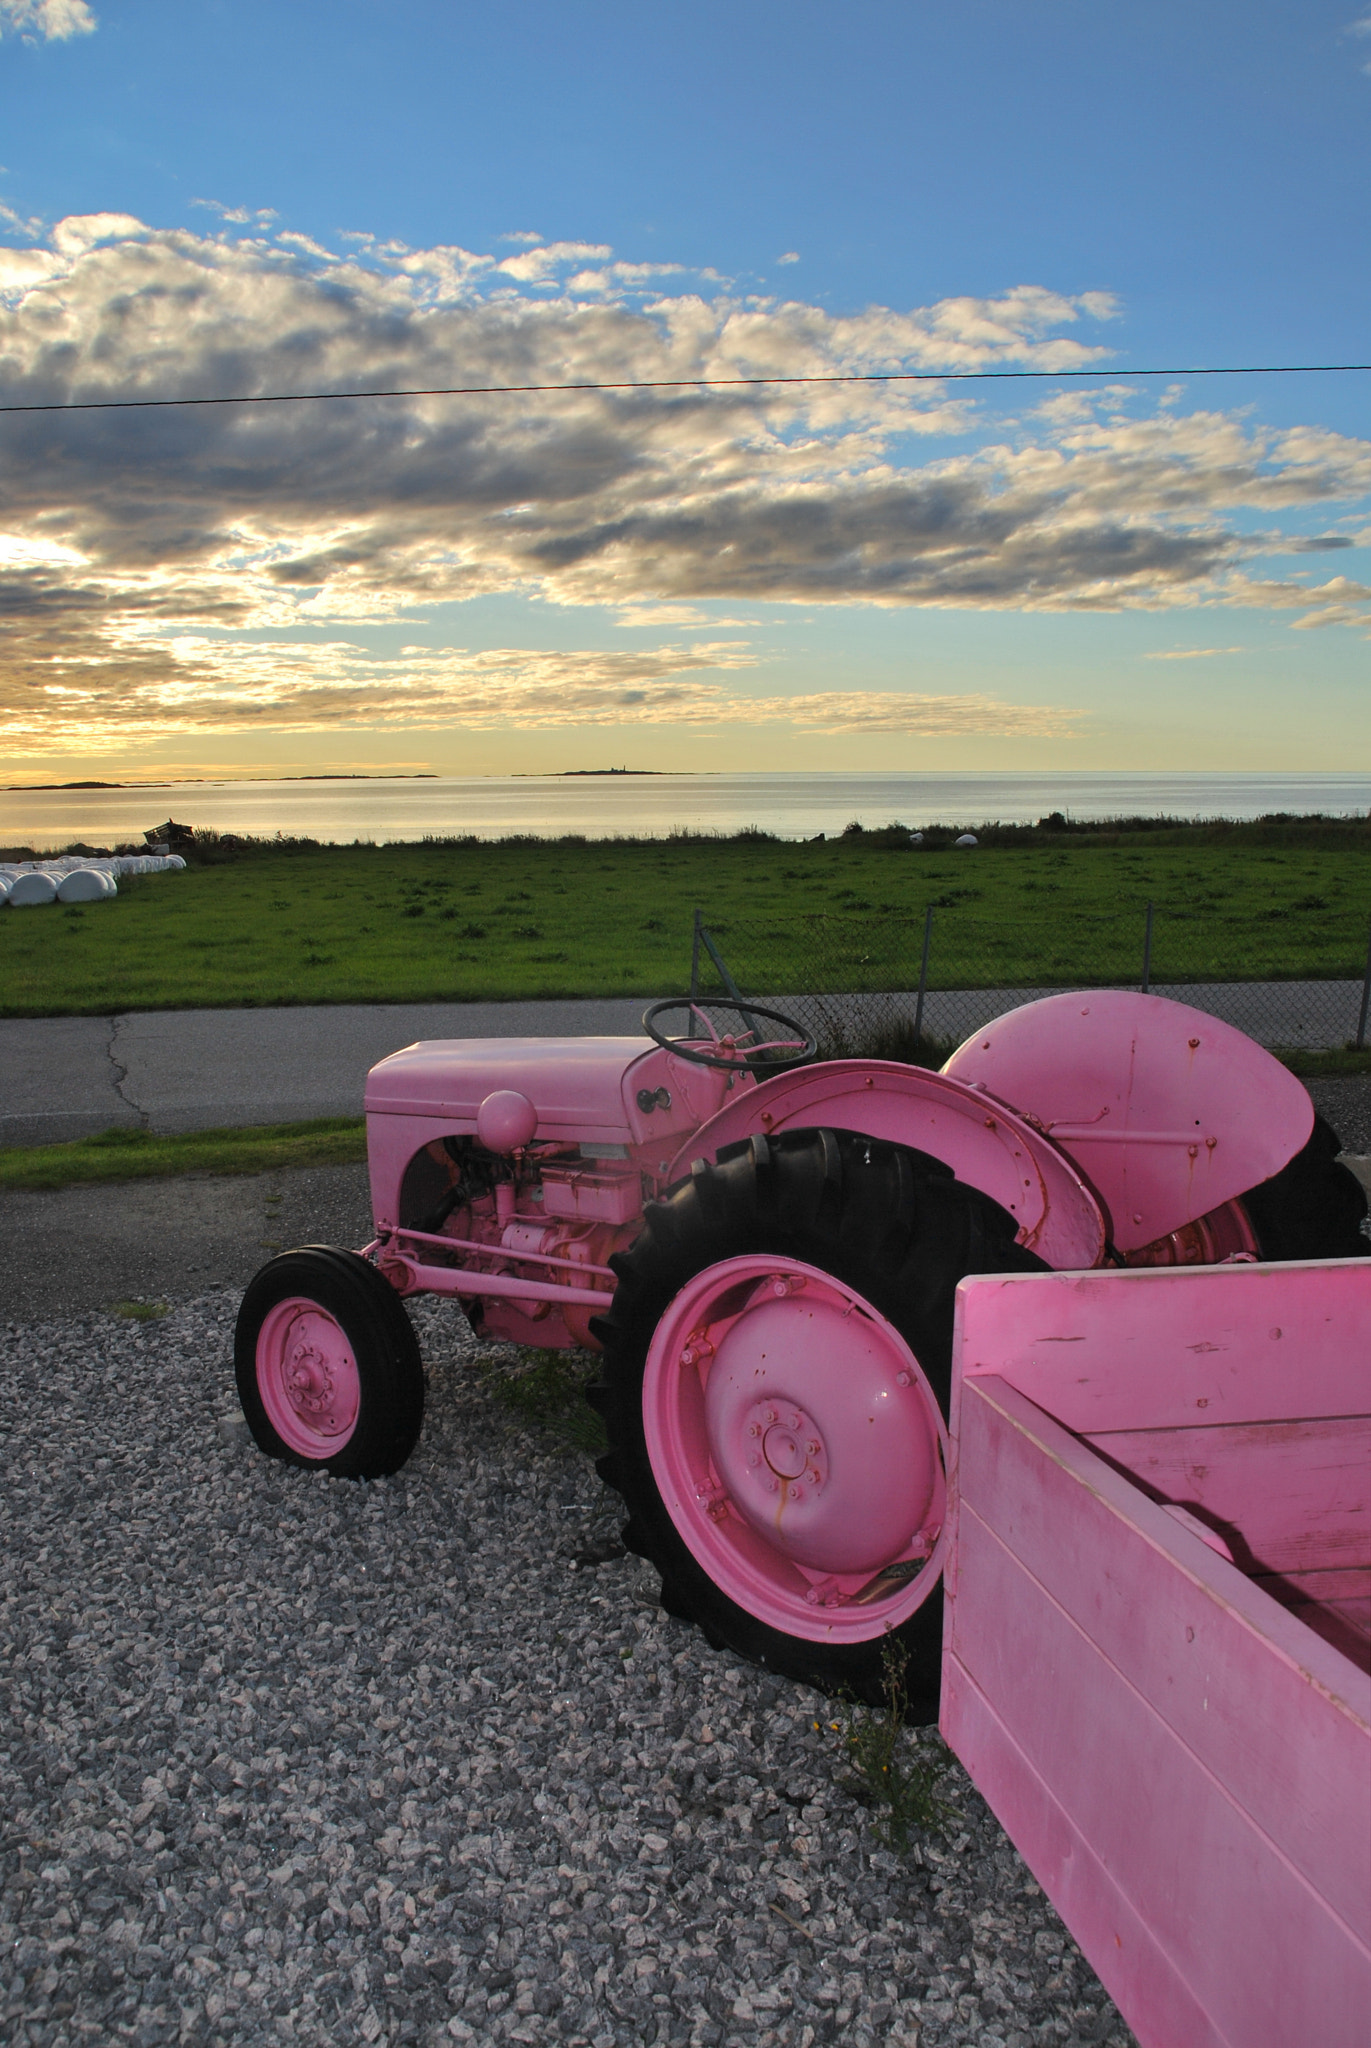 Nikon D60 + Sigma 18-200mm F3.5-6.3 DC sample photo. Pink tractor photography